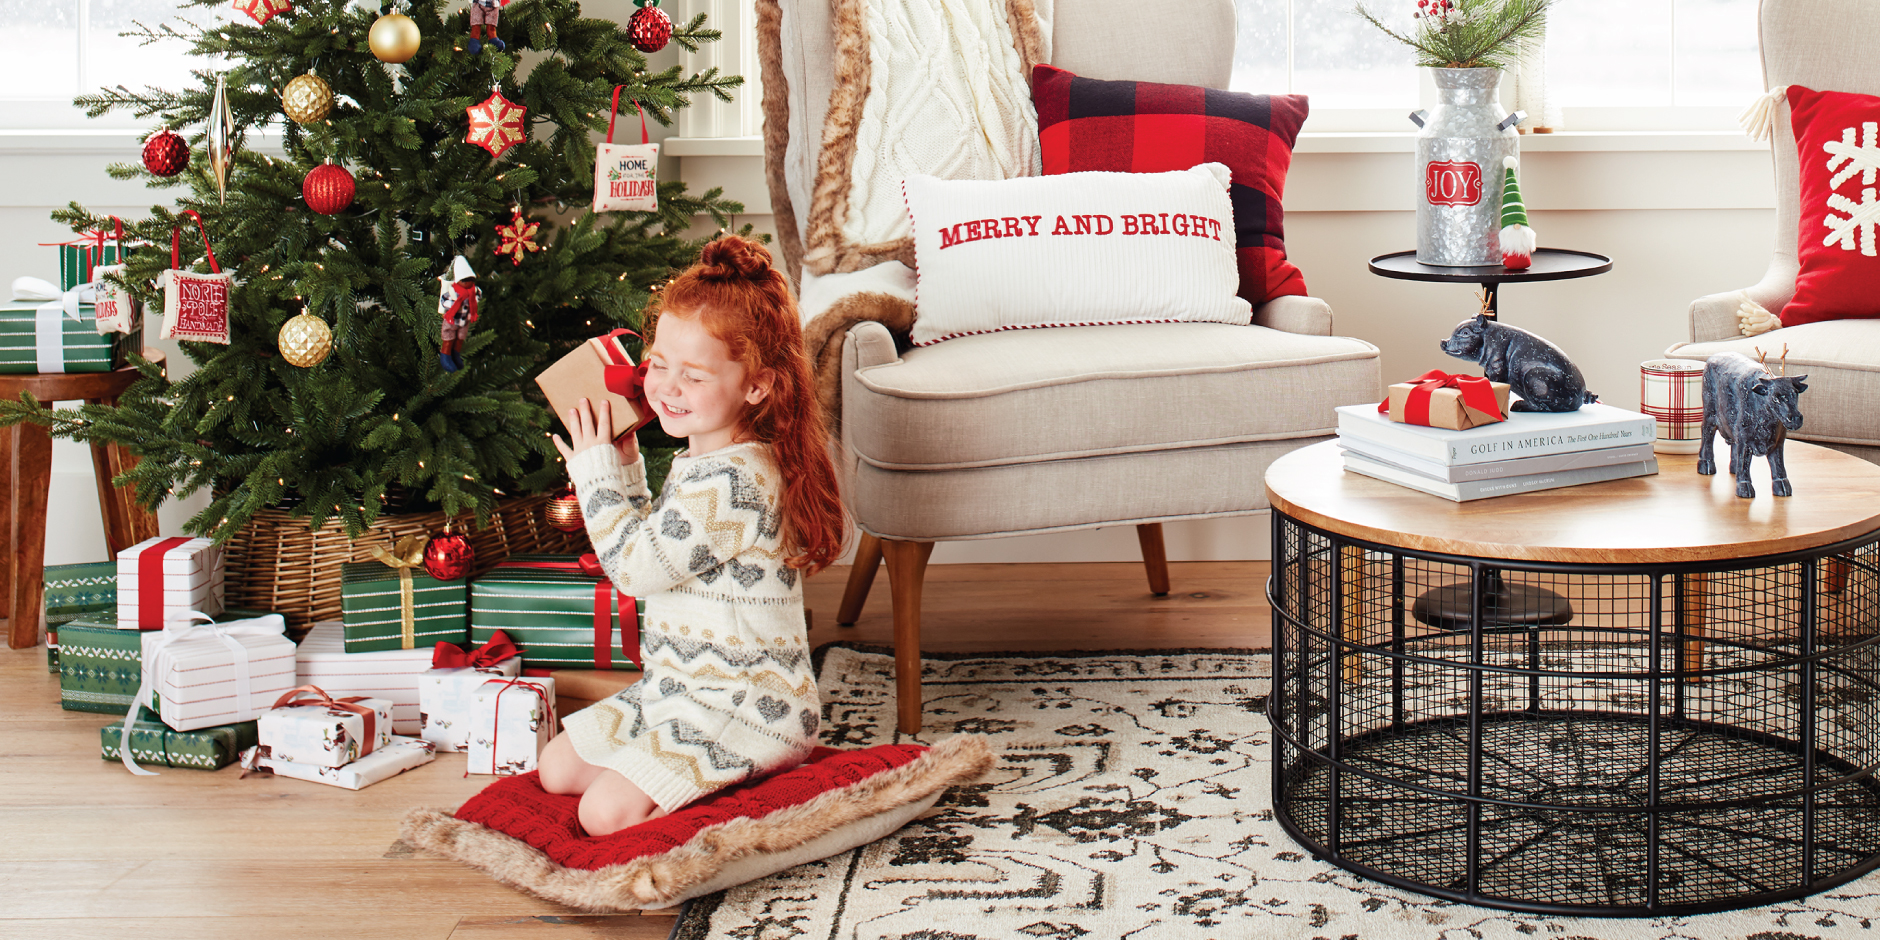 At Home: This Christmas make a scene with your tree